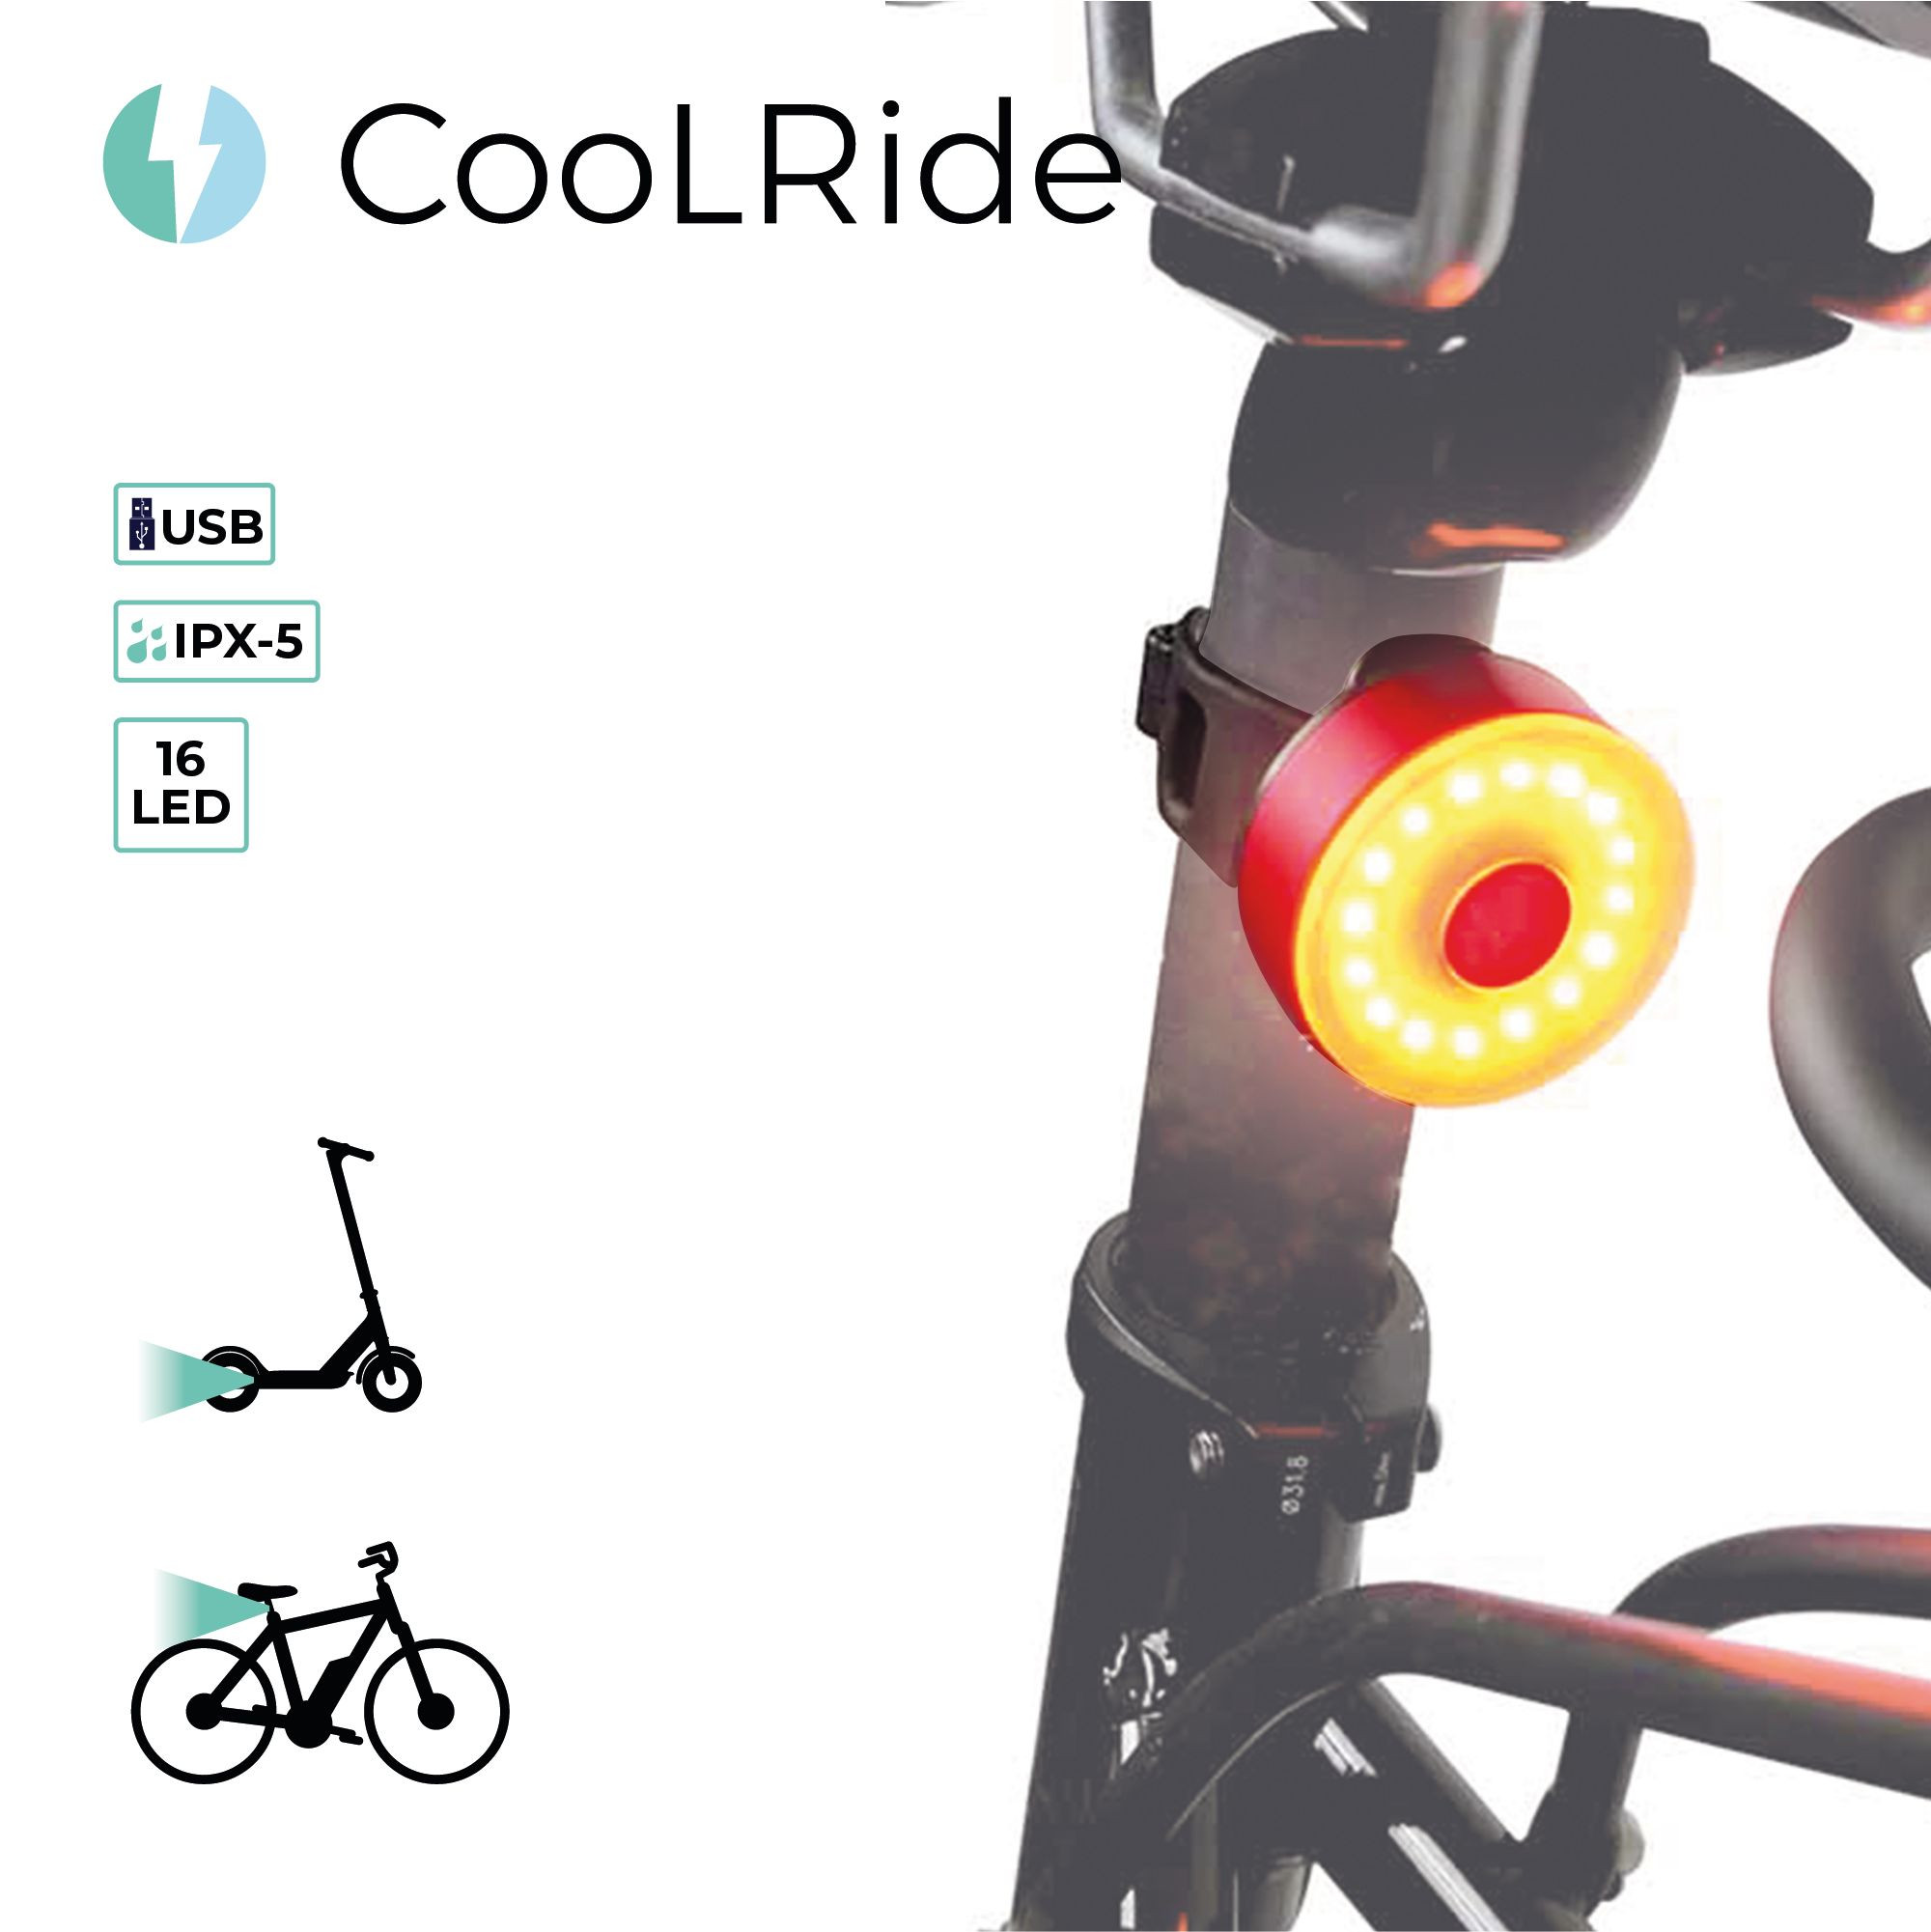 Cool ride ECLAIRAGE MULTI-USAGES RECHARGEABLE USB